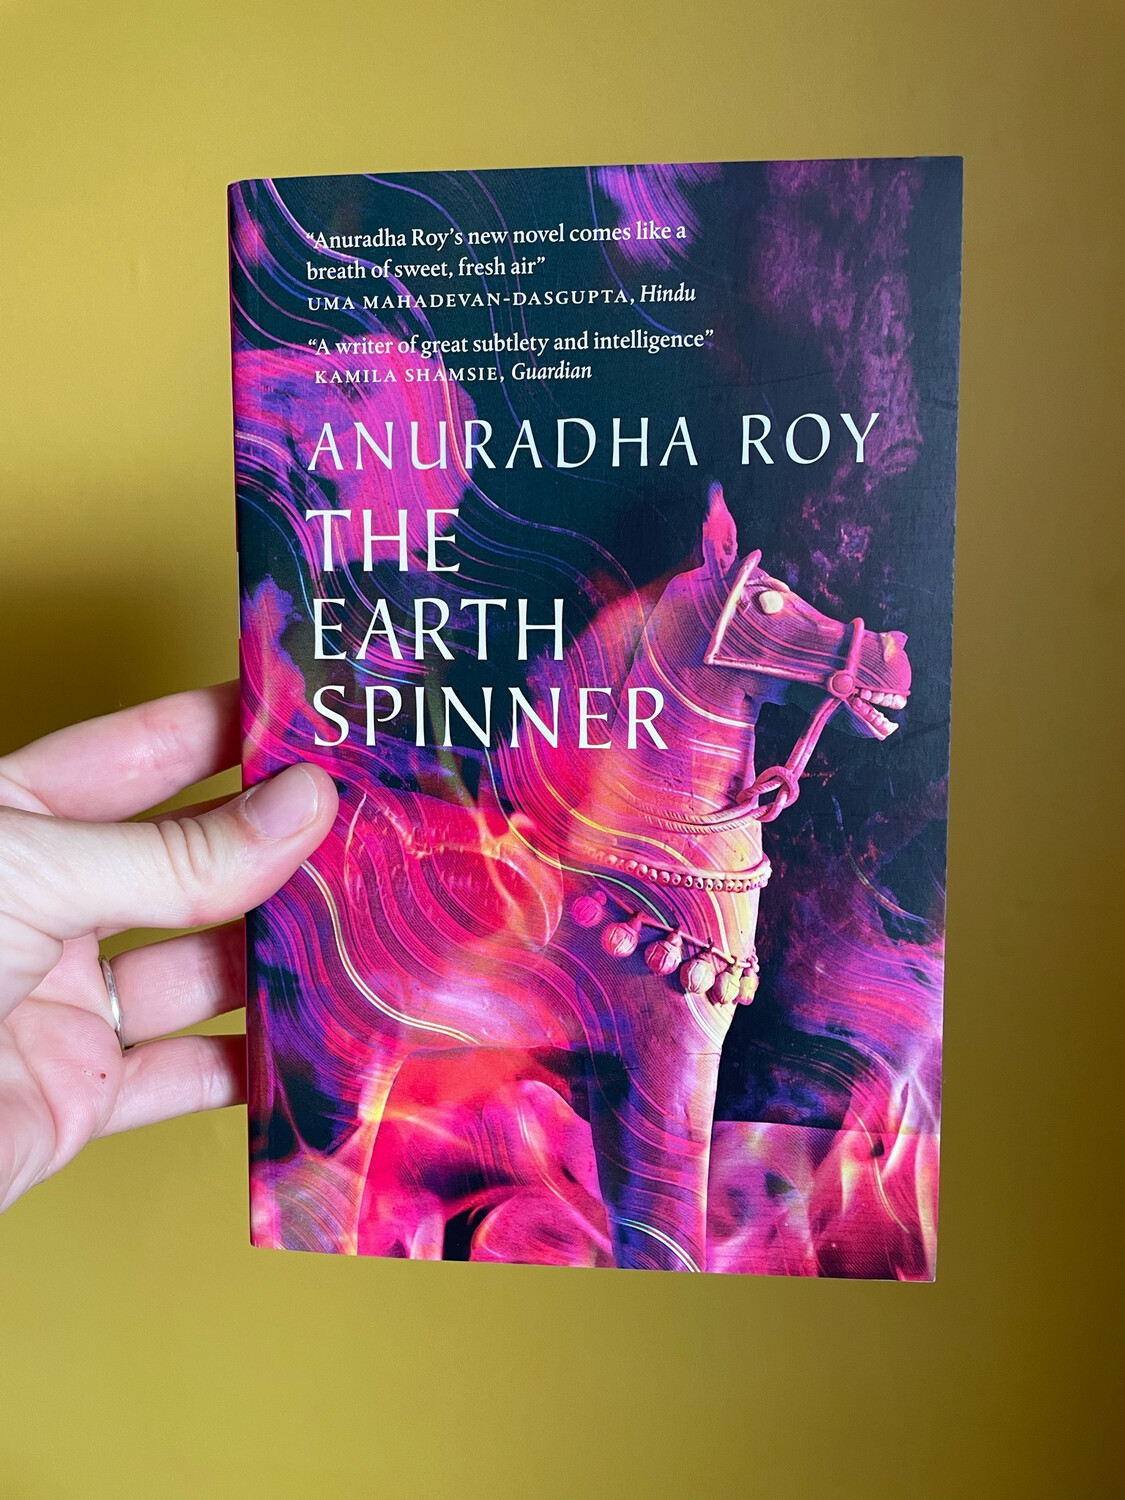 The Earth spinner By Anuradha Roy